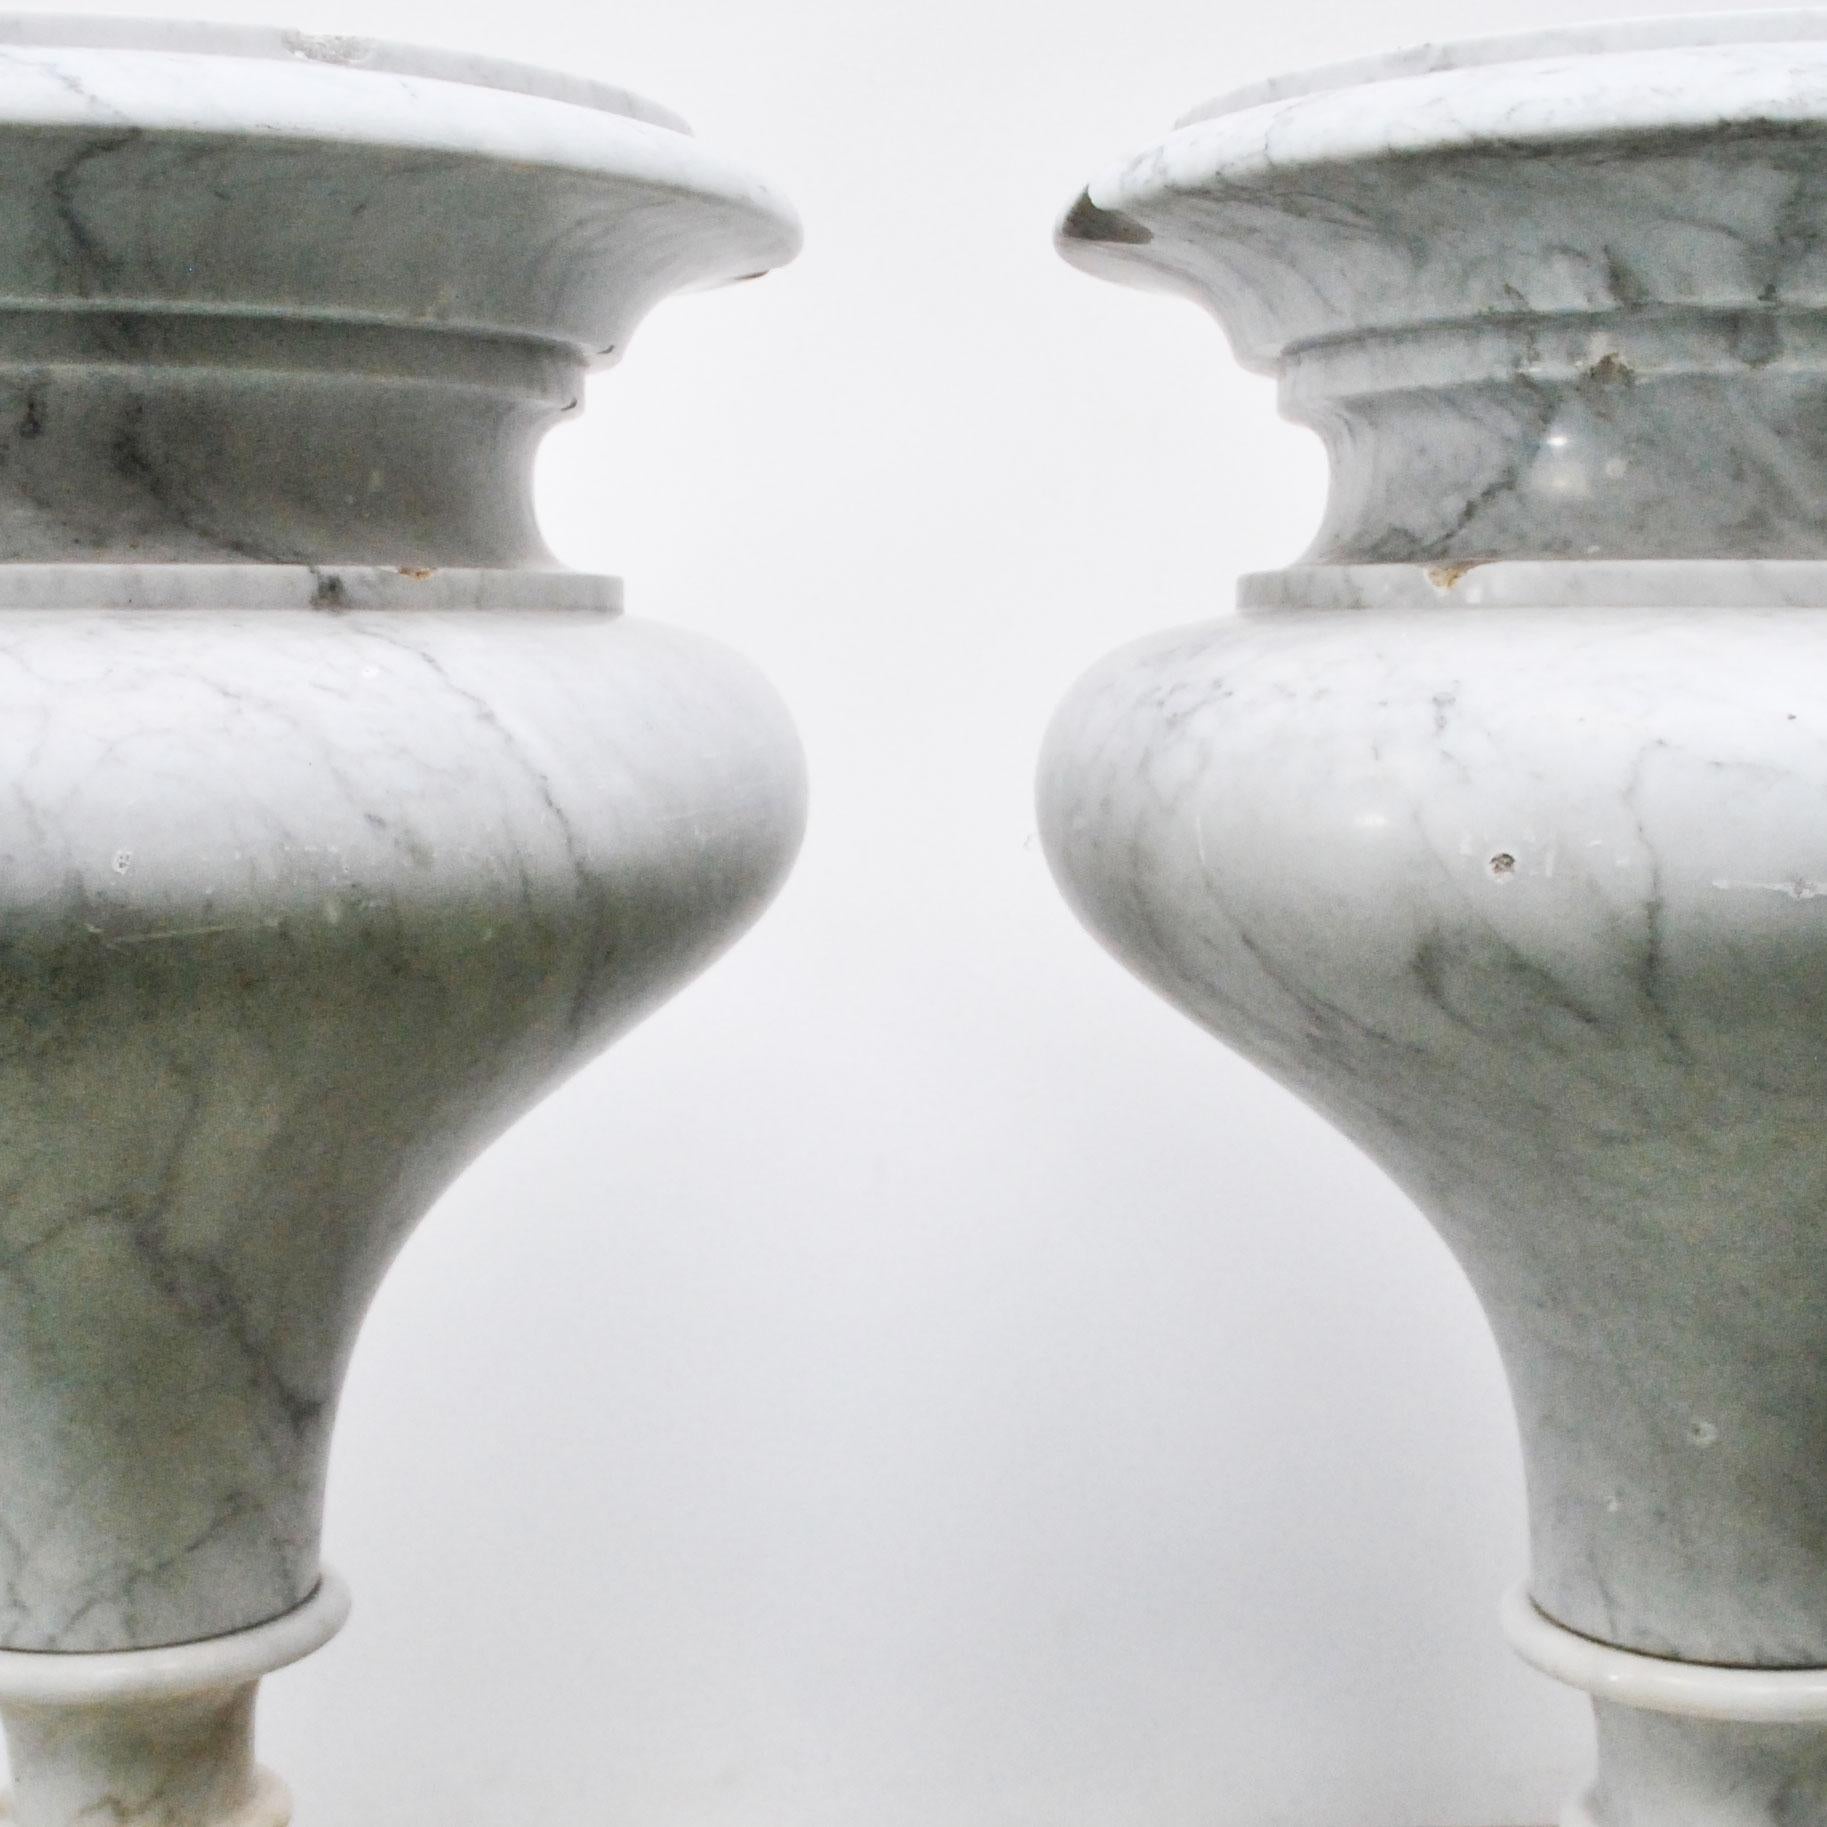 Elegant Pair of Large Carrara Marble Vases, Period Early 20th Century For Sale 4